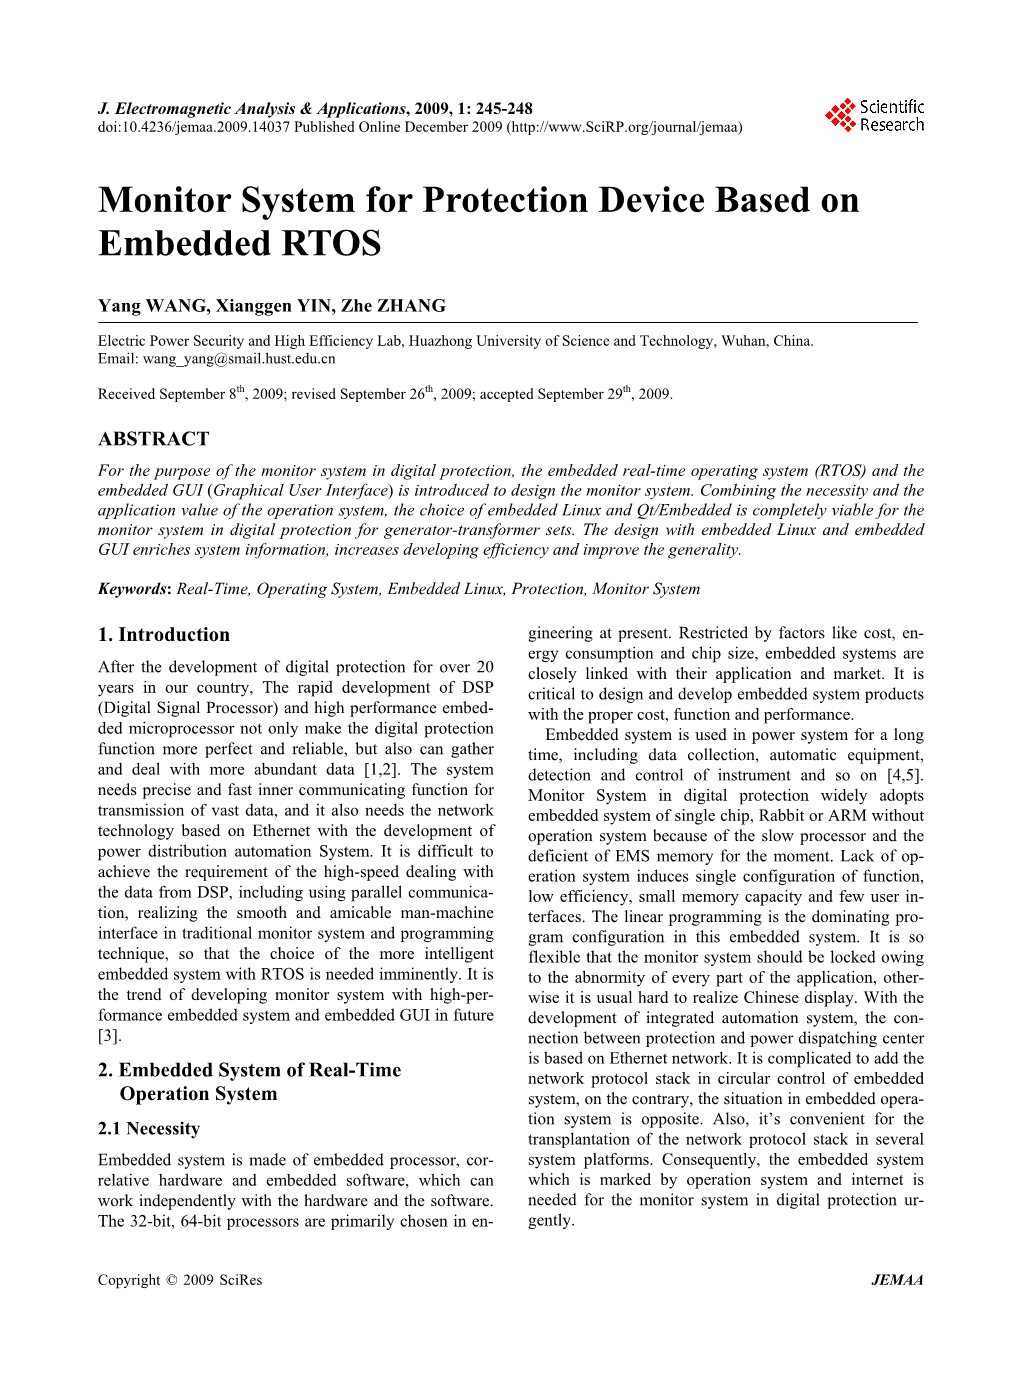 Monitor System for Protection Device Based on Embedded RTOS